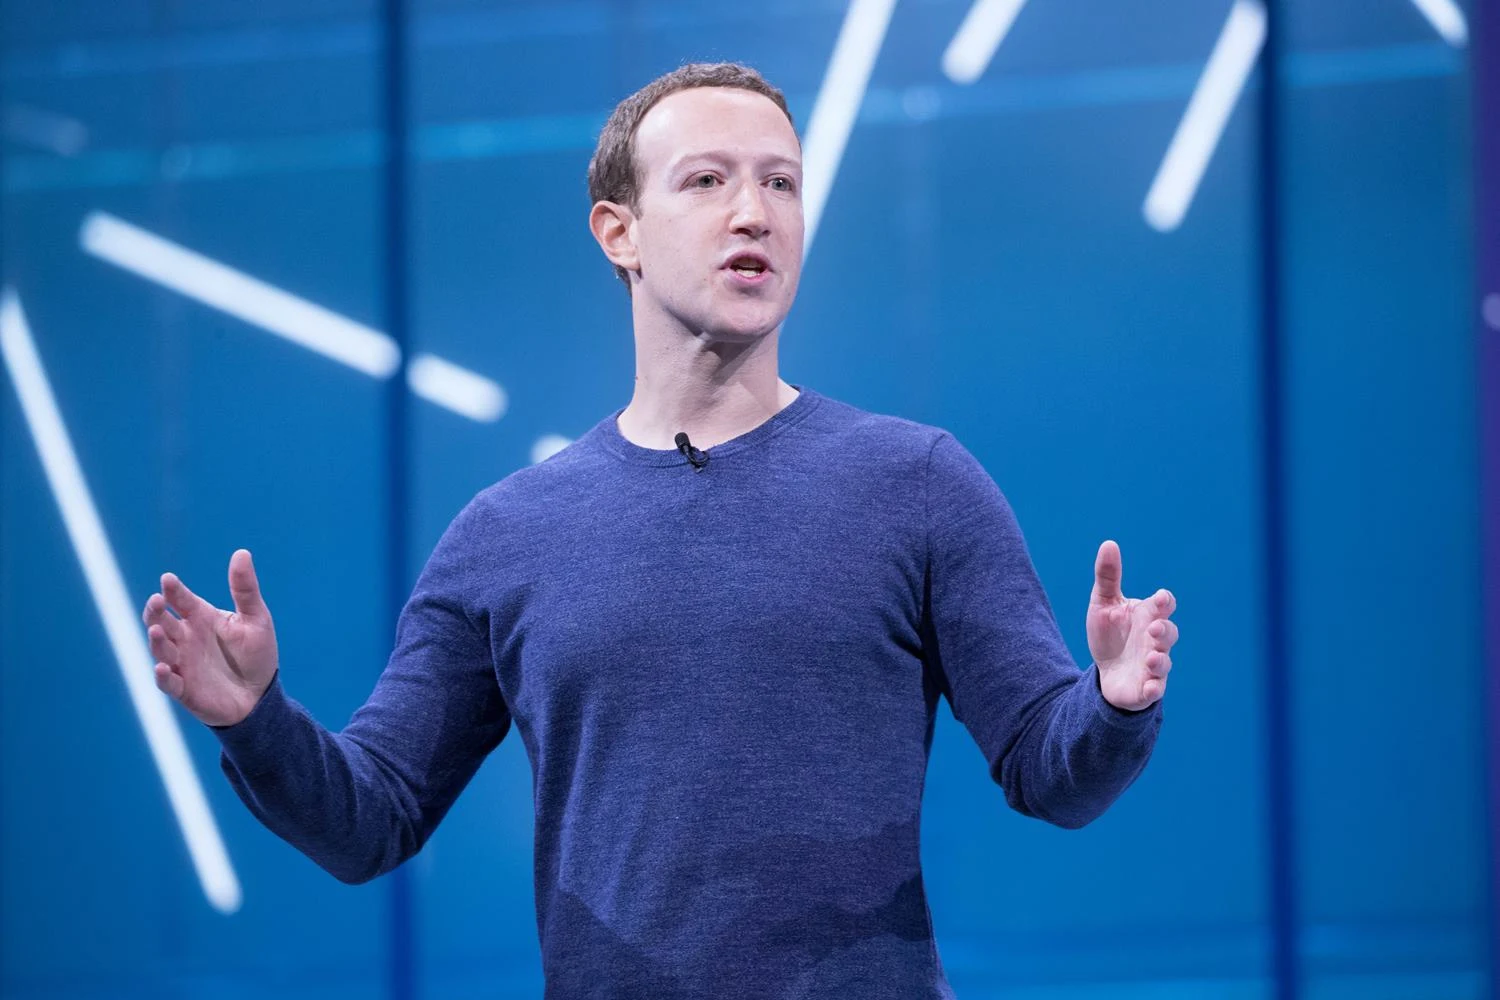 Facebook properties saw content consumption slide 7% in September, analysis finds